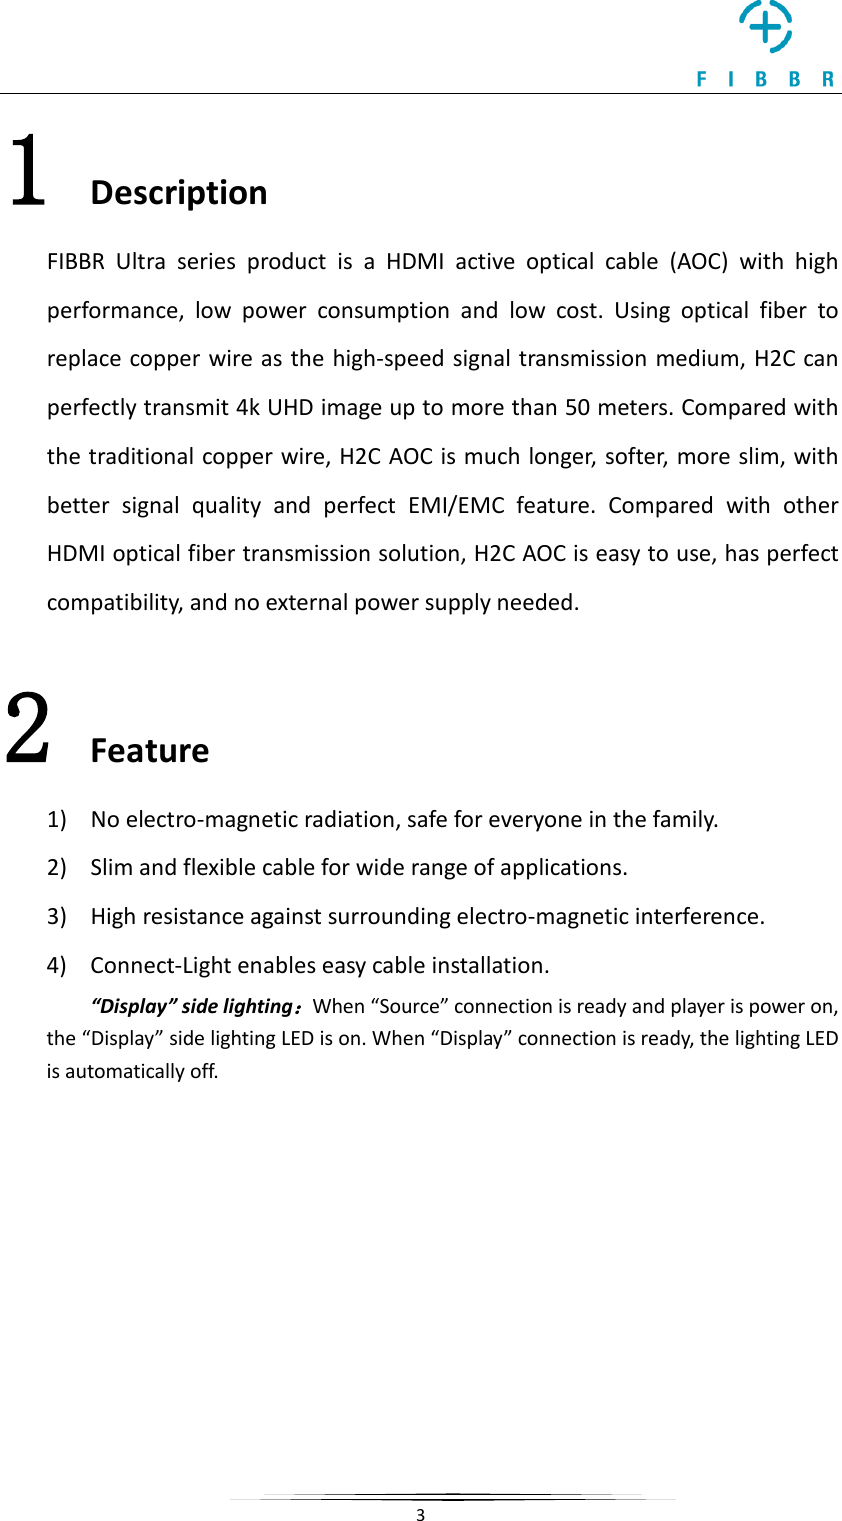     3  1 Description FIBBR Ultra series product is a HDMI active optical cable (AOC) with high performance,  low power consumption and low cost. Using optical fiber to replace copper wire as the high-speed signal transmission medium, H2C can perfectly transmit 4k UHD image up to more than 50 meters. Compared with the traditional copper wire, H2C AOC is much longer, sof ter, more slim, with better signal quality and perfect EMI/EMC feature.  Compared with other HDMI optical fiber transmission solution, H2C AOC is easy to use, has perfect compatibility, and no external power supply needed. 2 Feature 1) No electro-magnetic radiation, safe for everyone in the family. 2) Slim and flexible cable for wide range of applications. 3) High resistance against surrounding electro-magnetic interference. 4) Connect-Light enables easy cable installation. “Display” side lighting：When “Source” connection is ready and player is power on, the “Display” side lighting LED is on. When “Display” connection is ready, the lighting LED is automatically off.  